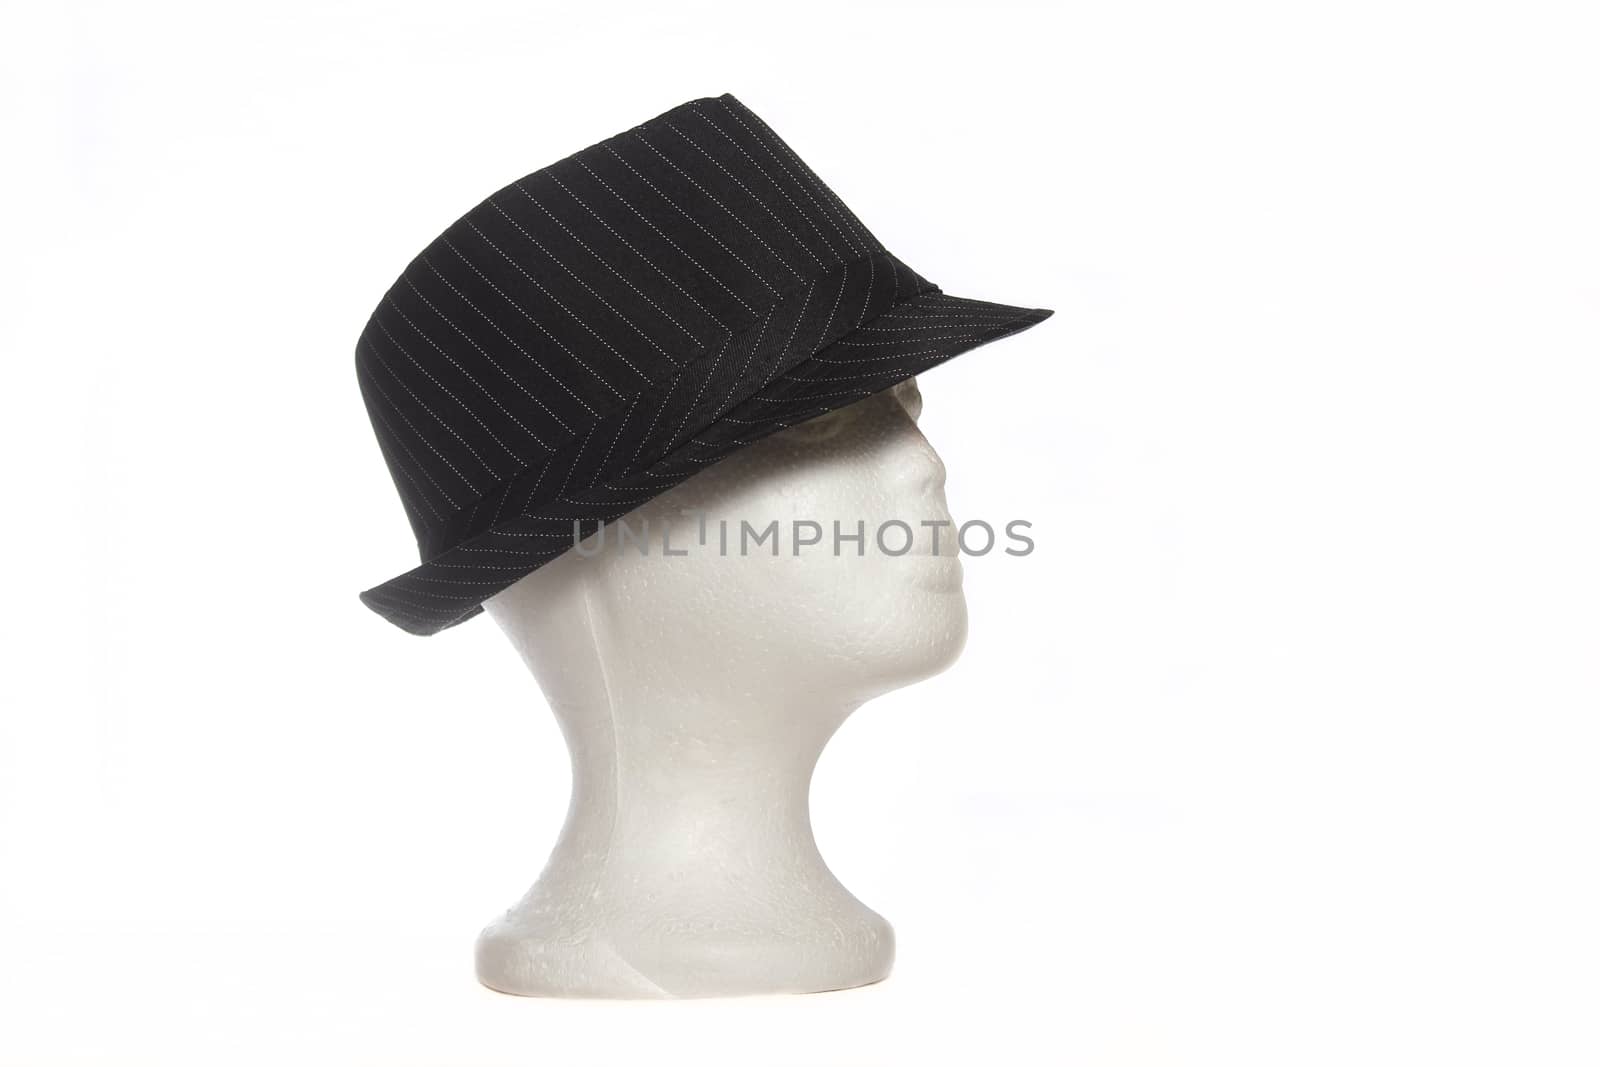 Classic Fedora Hat on Mannequin Head Isolated by Marti157900